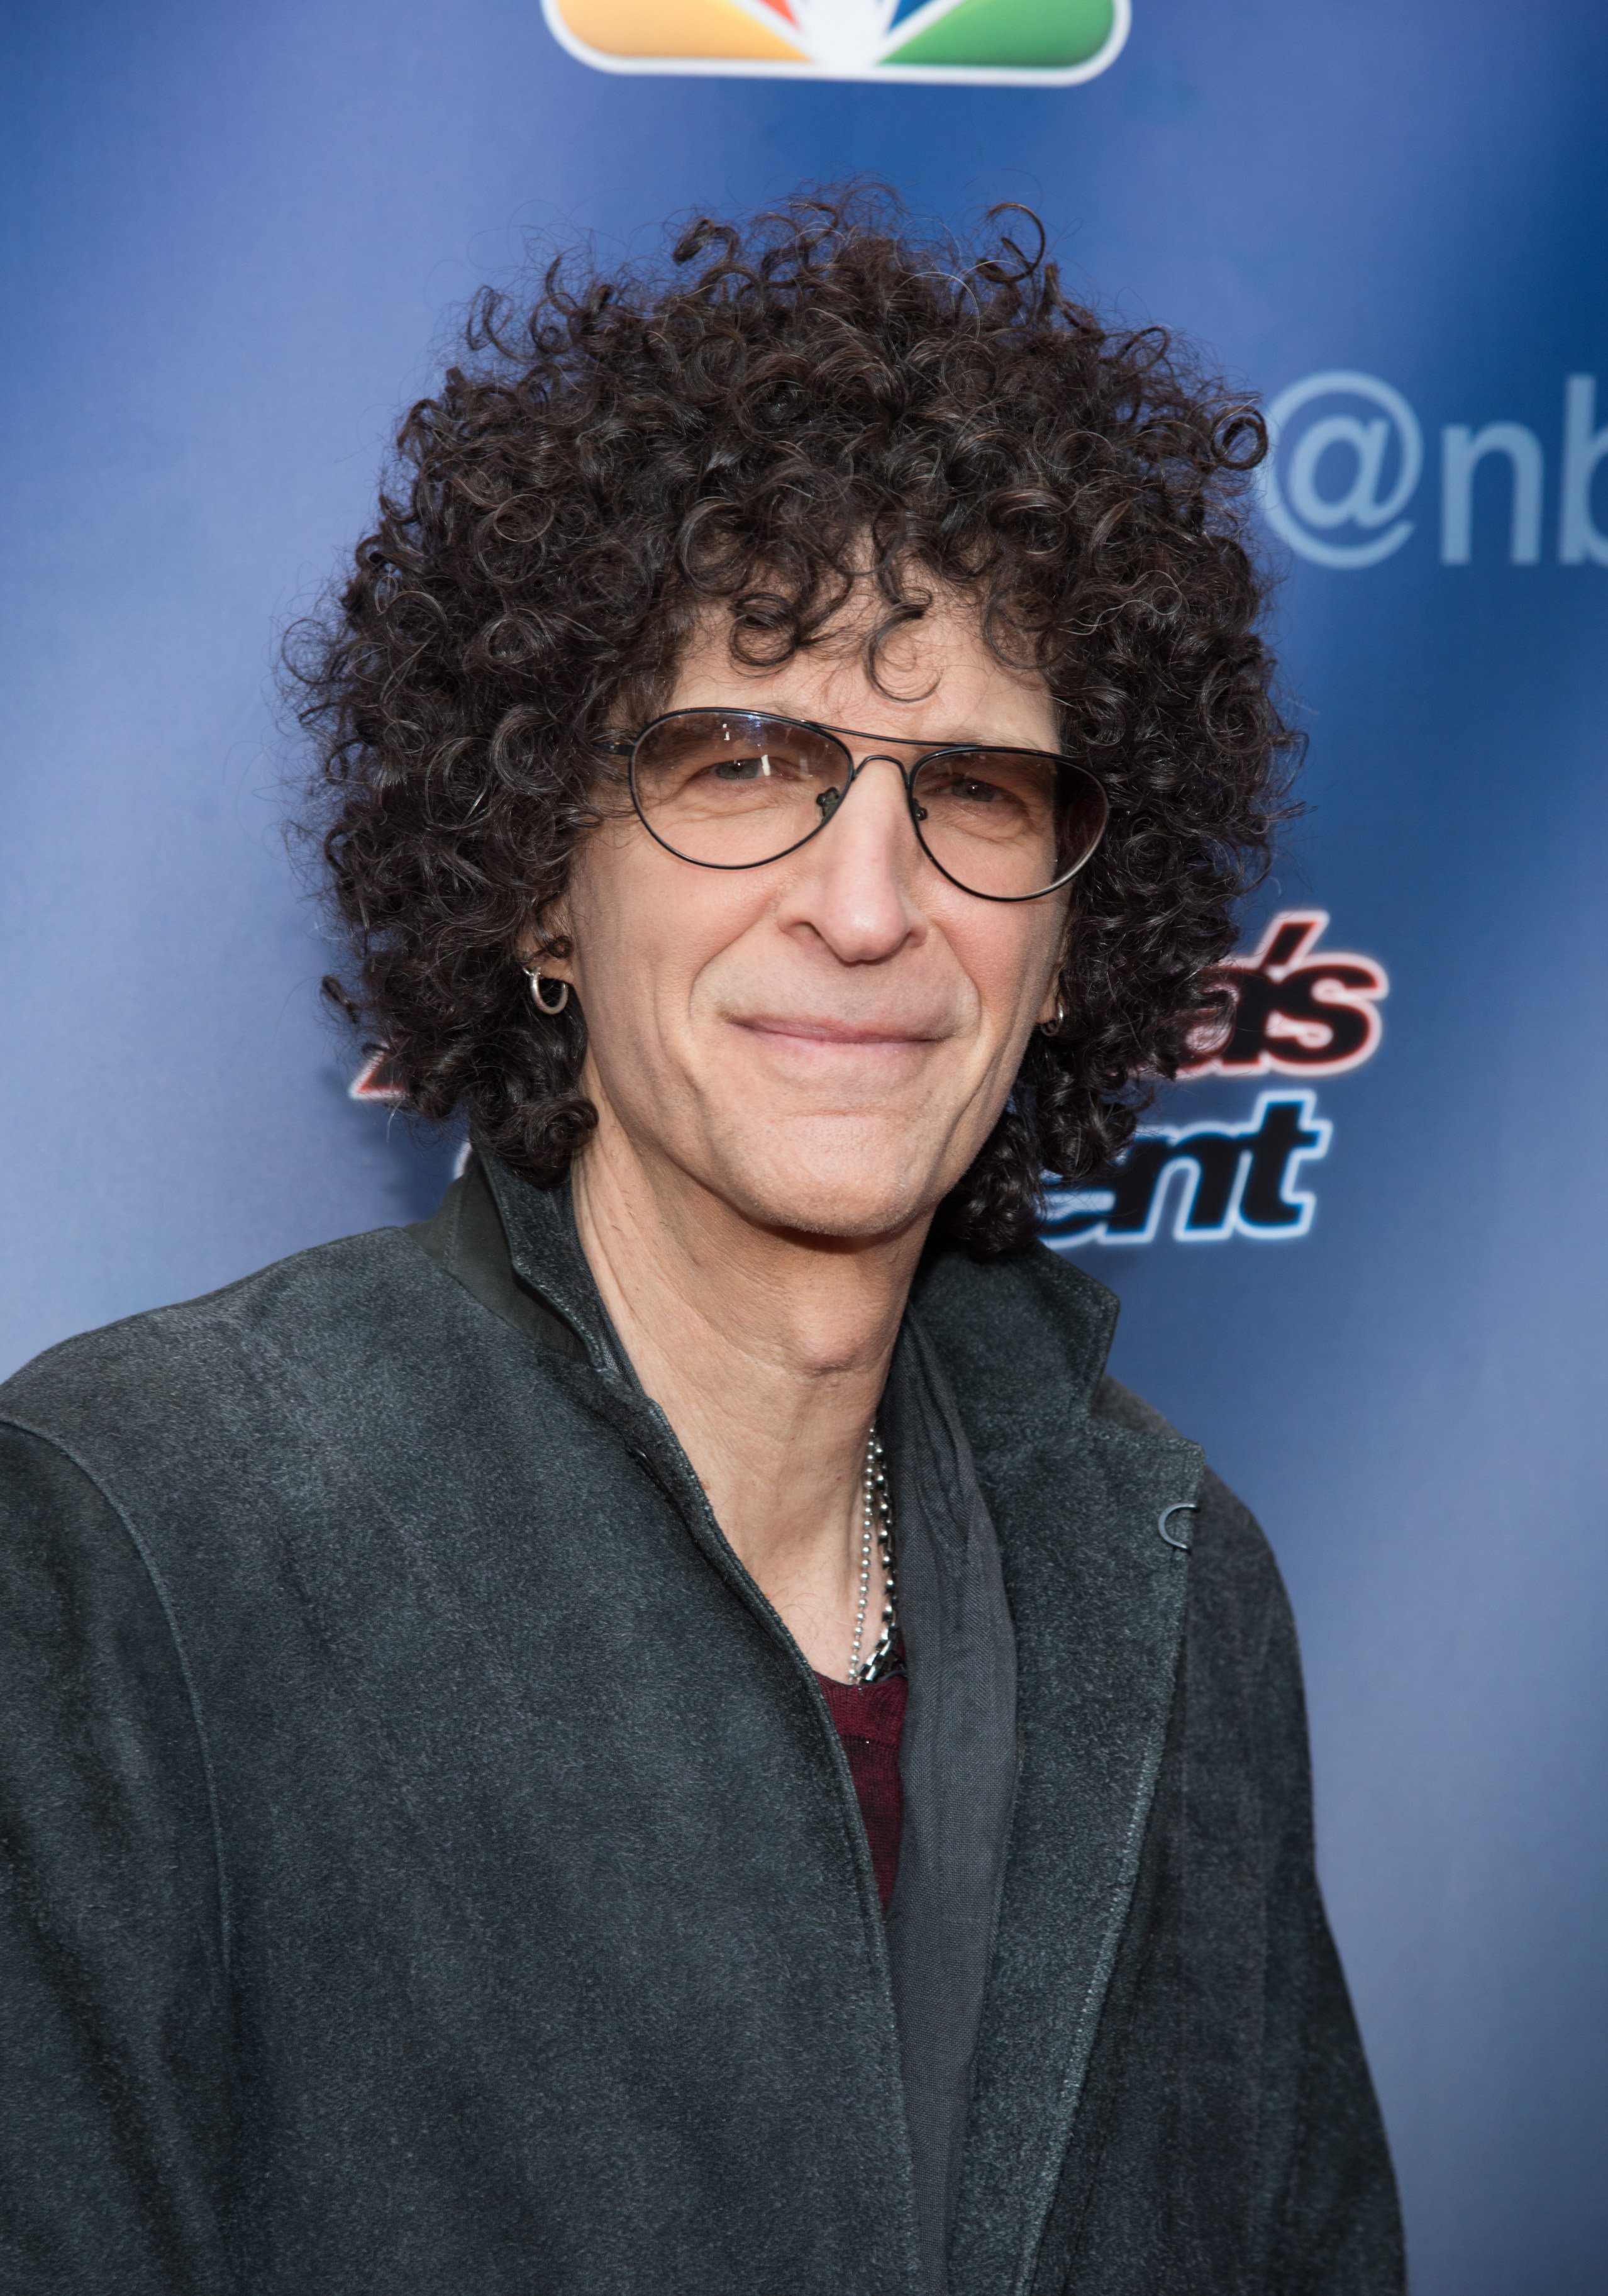 Howard Stern arrives at the "America's Got Talent" Season 10 Red Carpet Event at New Jersey Performing Arts Center on March 2, 2015 | Photo: GettyImages